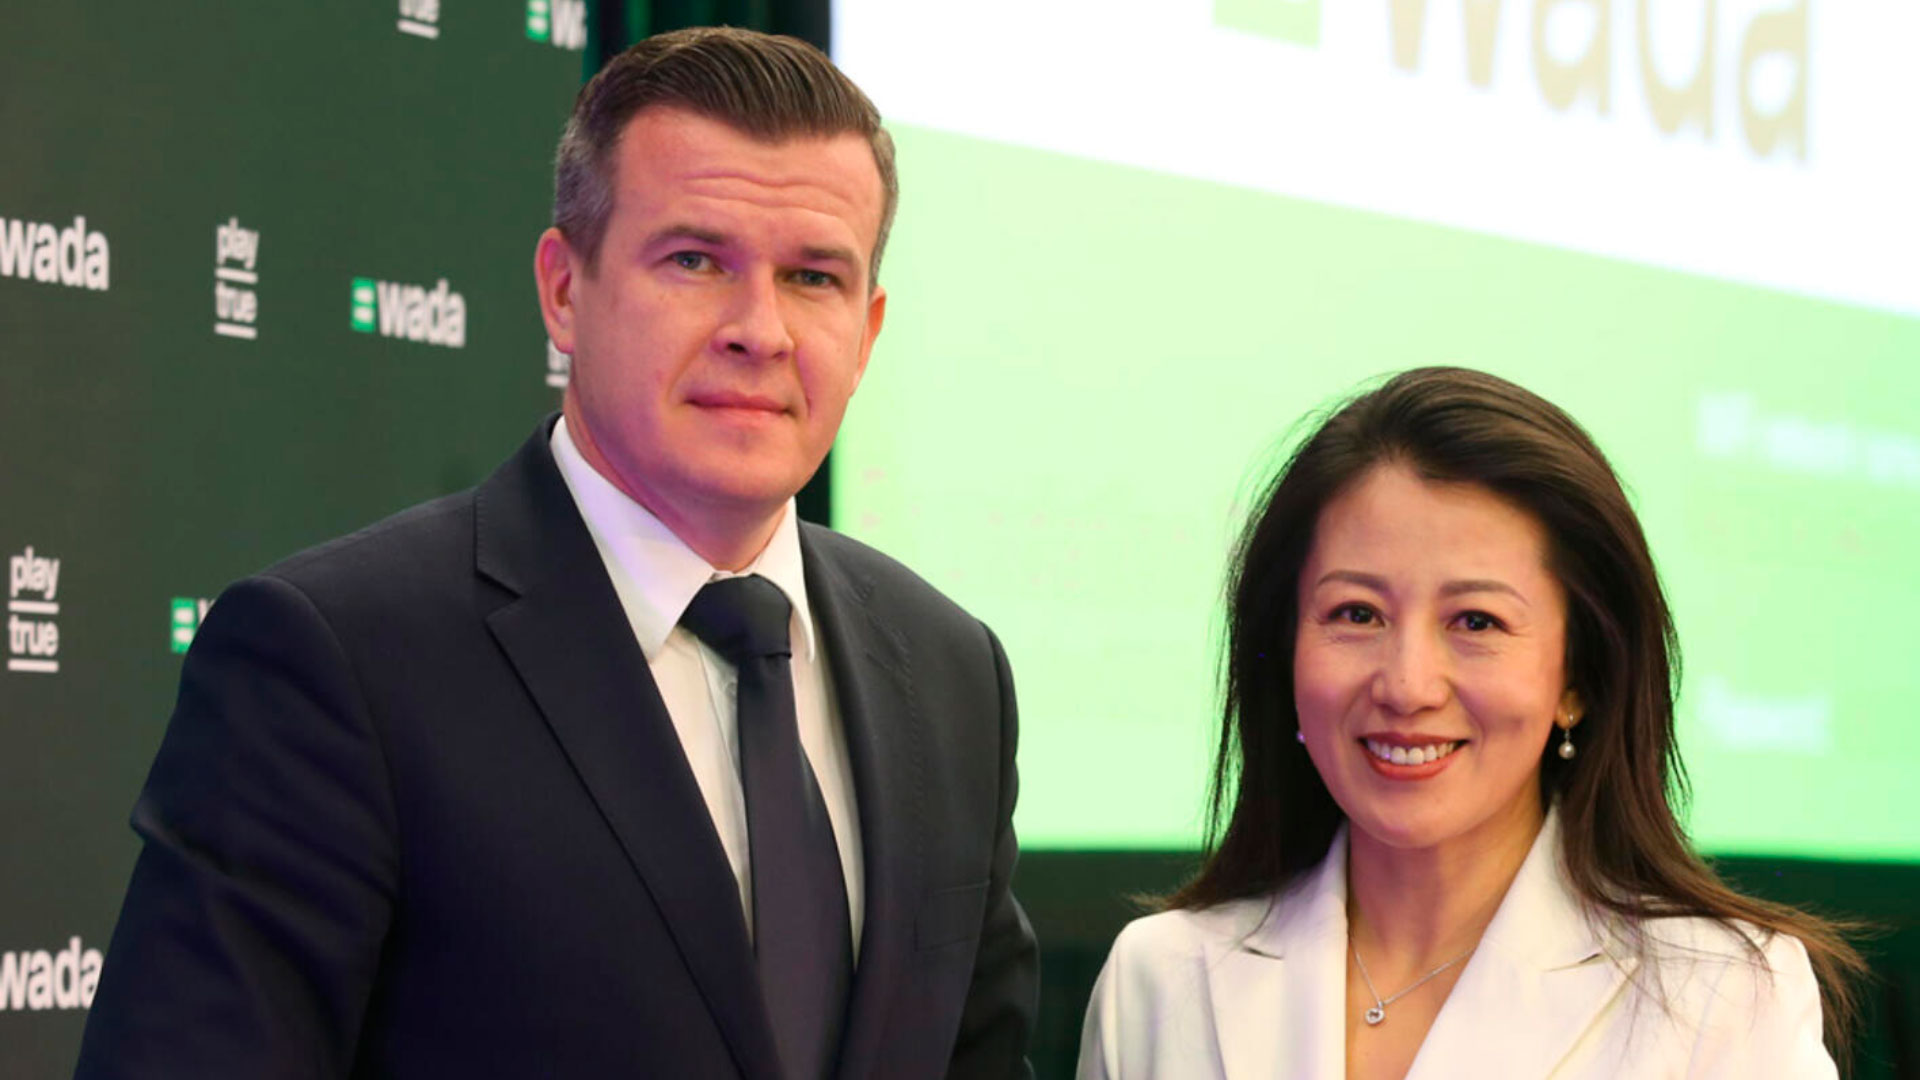 Witold Bańka (president) and Yang Yang (vice-president) were re-elected to the World Anti-Doping Agency. WADA